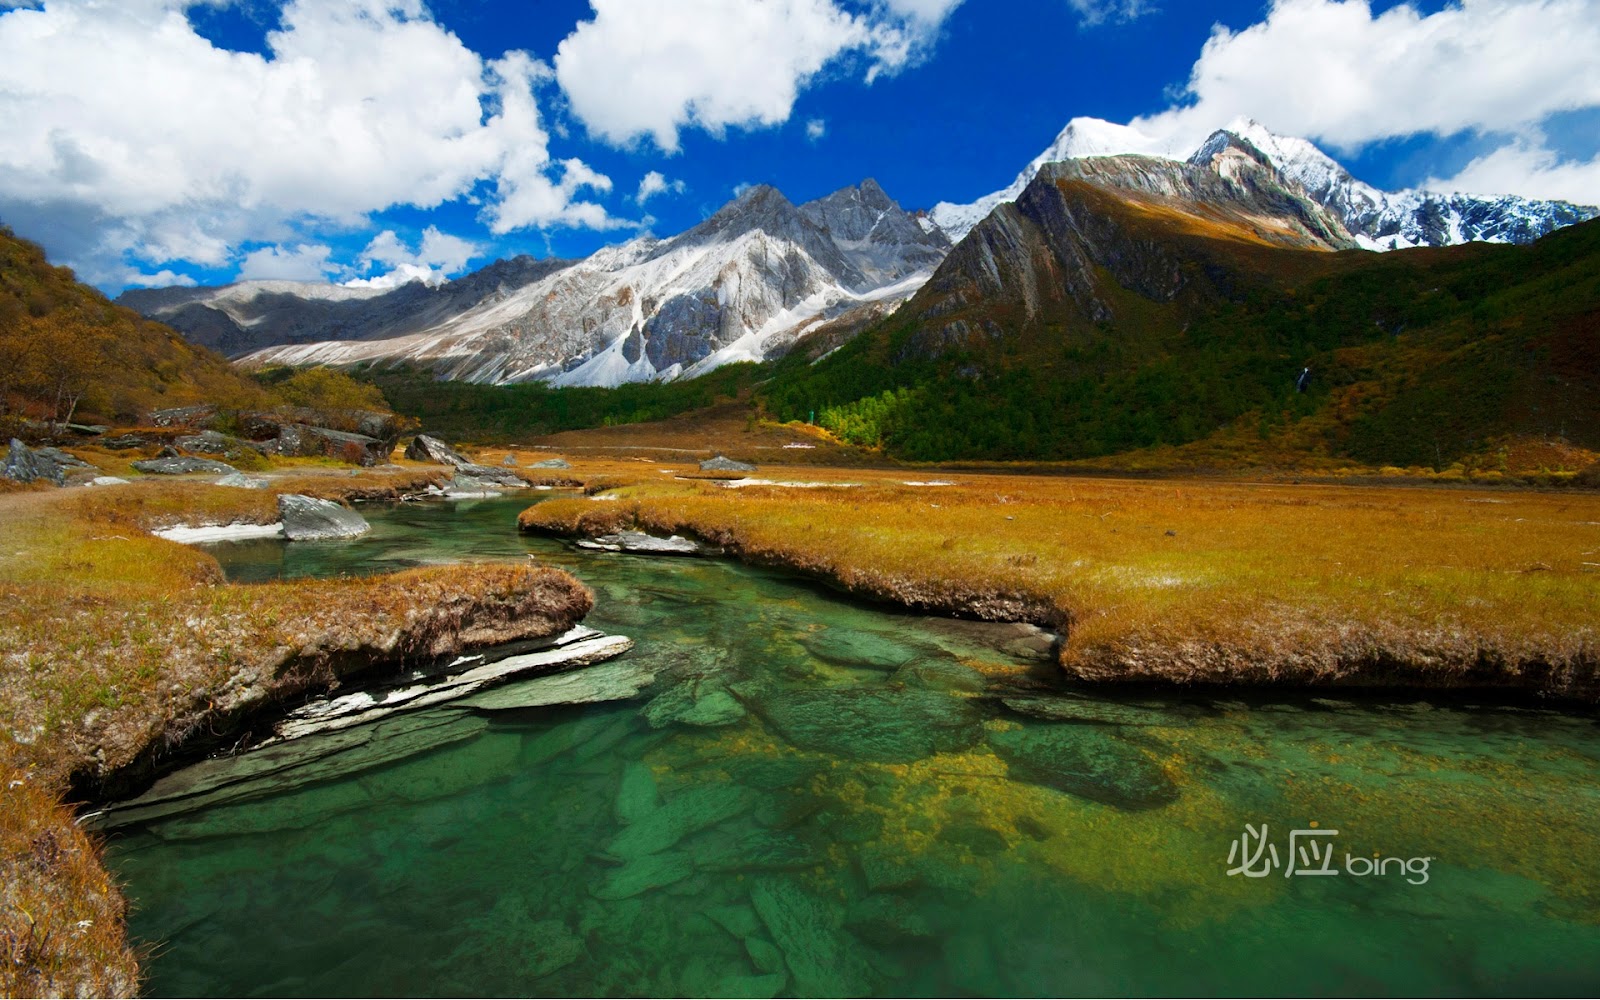  HD Nature Background Wallpapers For Laptop Scenery Southwest China